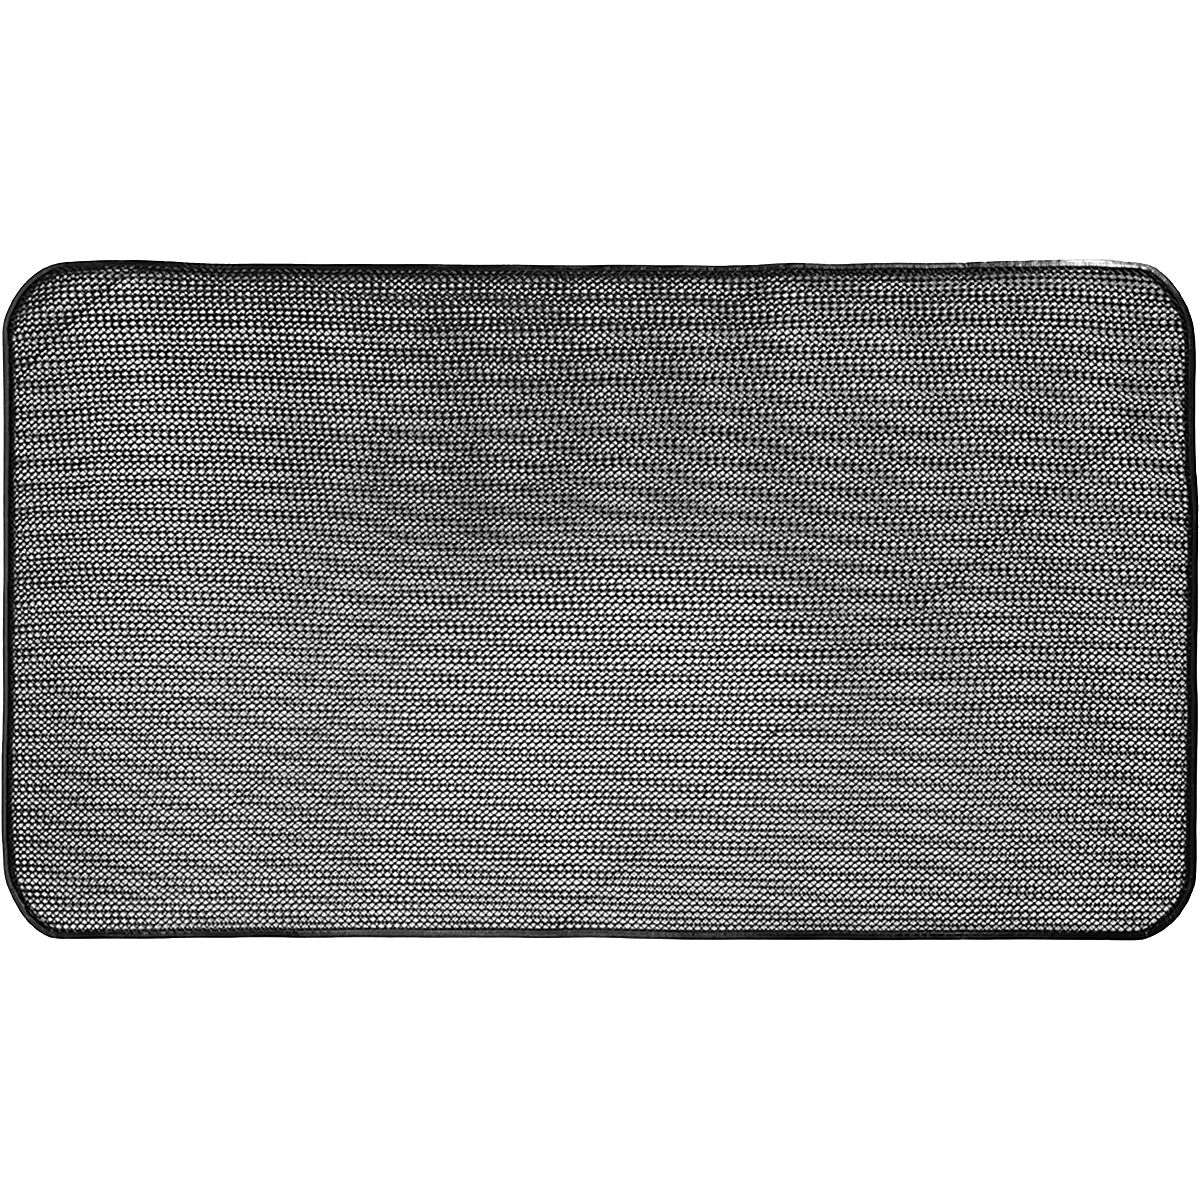 Thule Anti-Condensation Mat Foothill